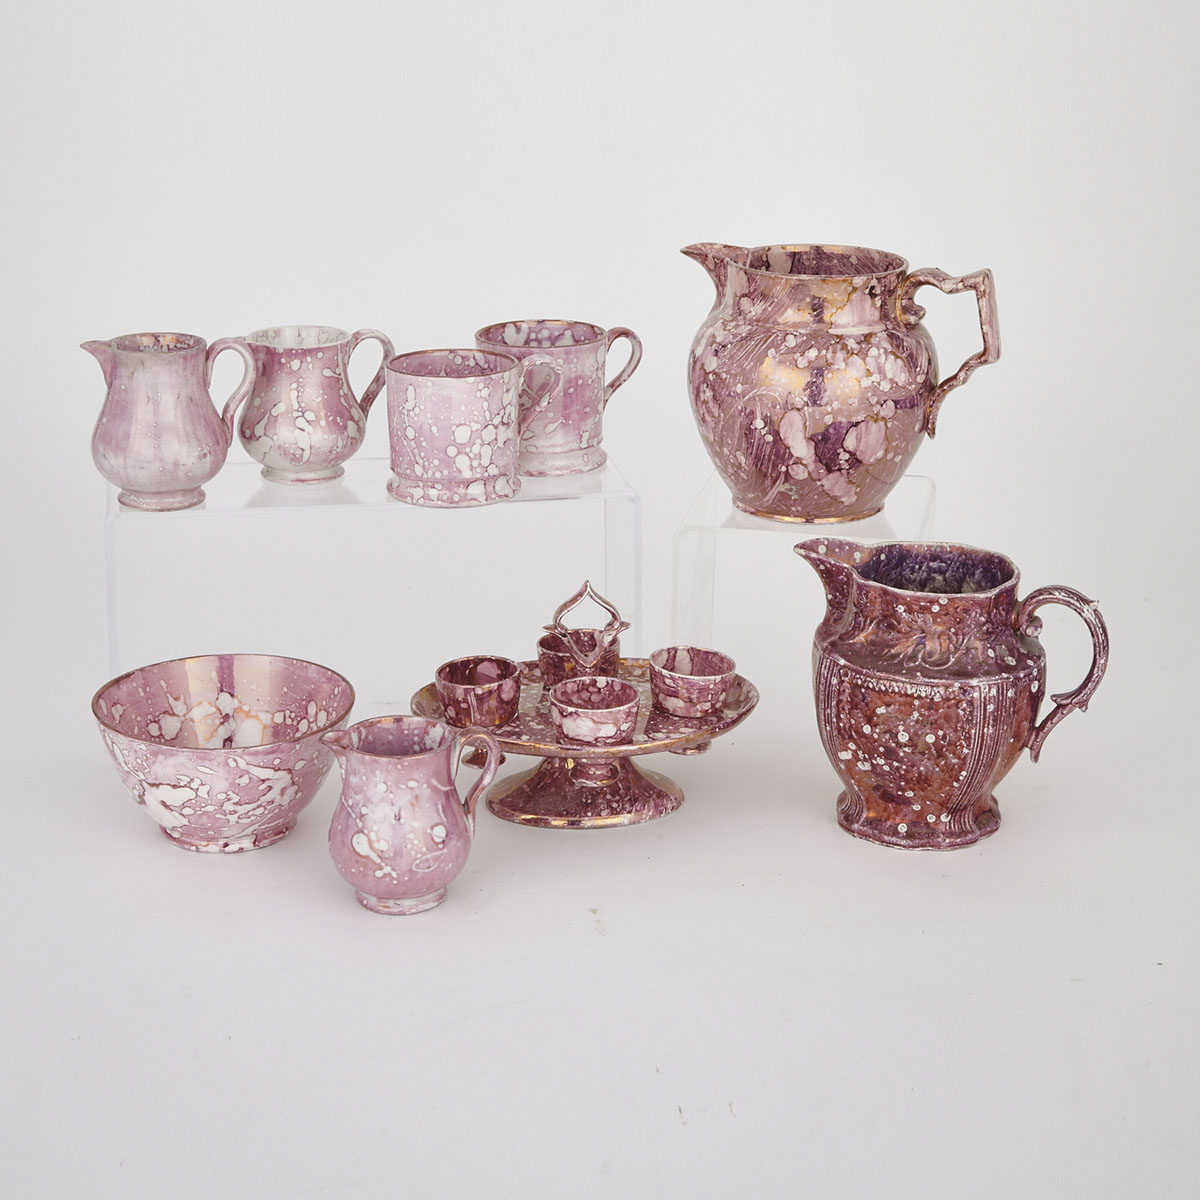 Group of English Spattered Pink Lustre Decorated Table Articles, 19th century